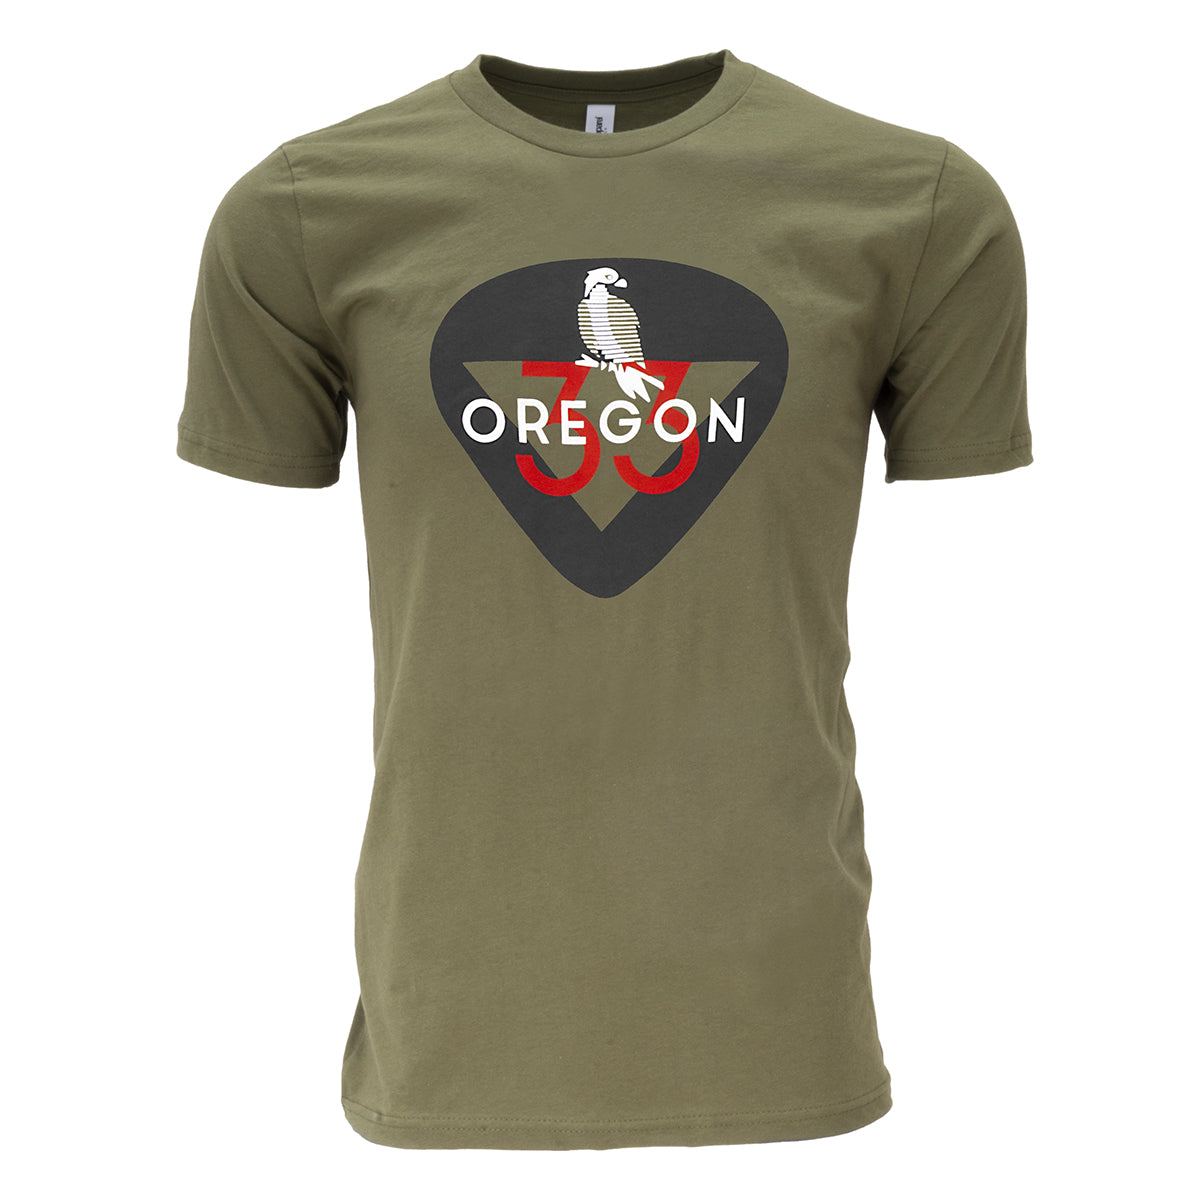 This tee shirt features Oregon's state raptor, the osprey, perched on the number 33, to symbolize Oregon's entry to the union as the thirty-third state.